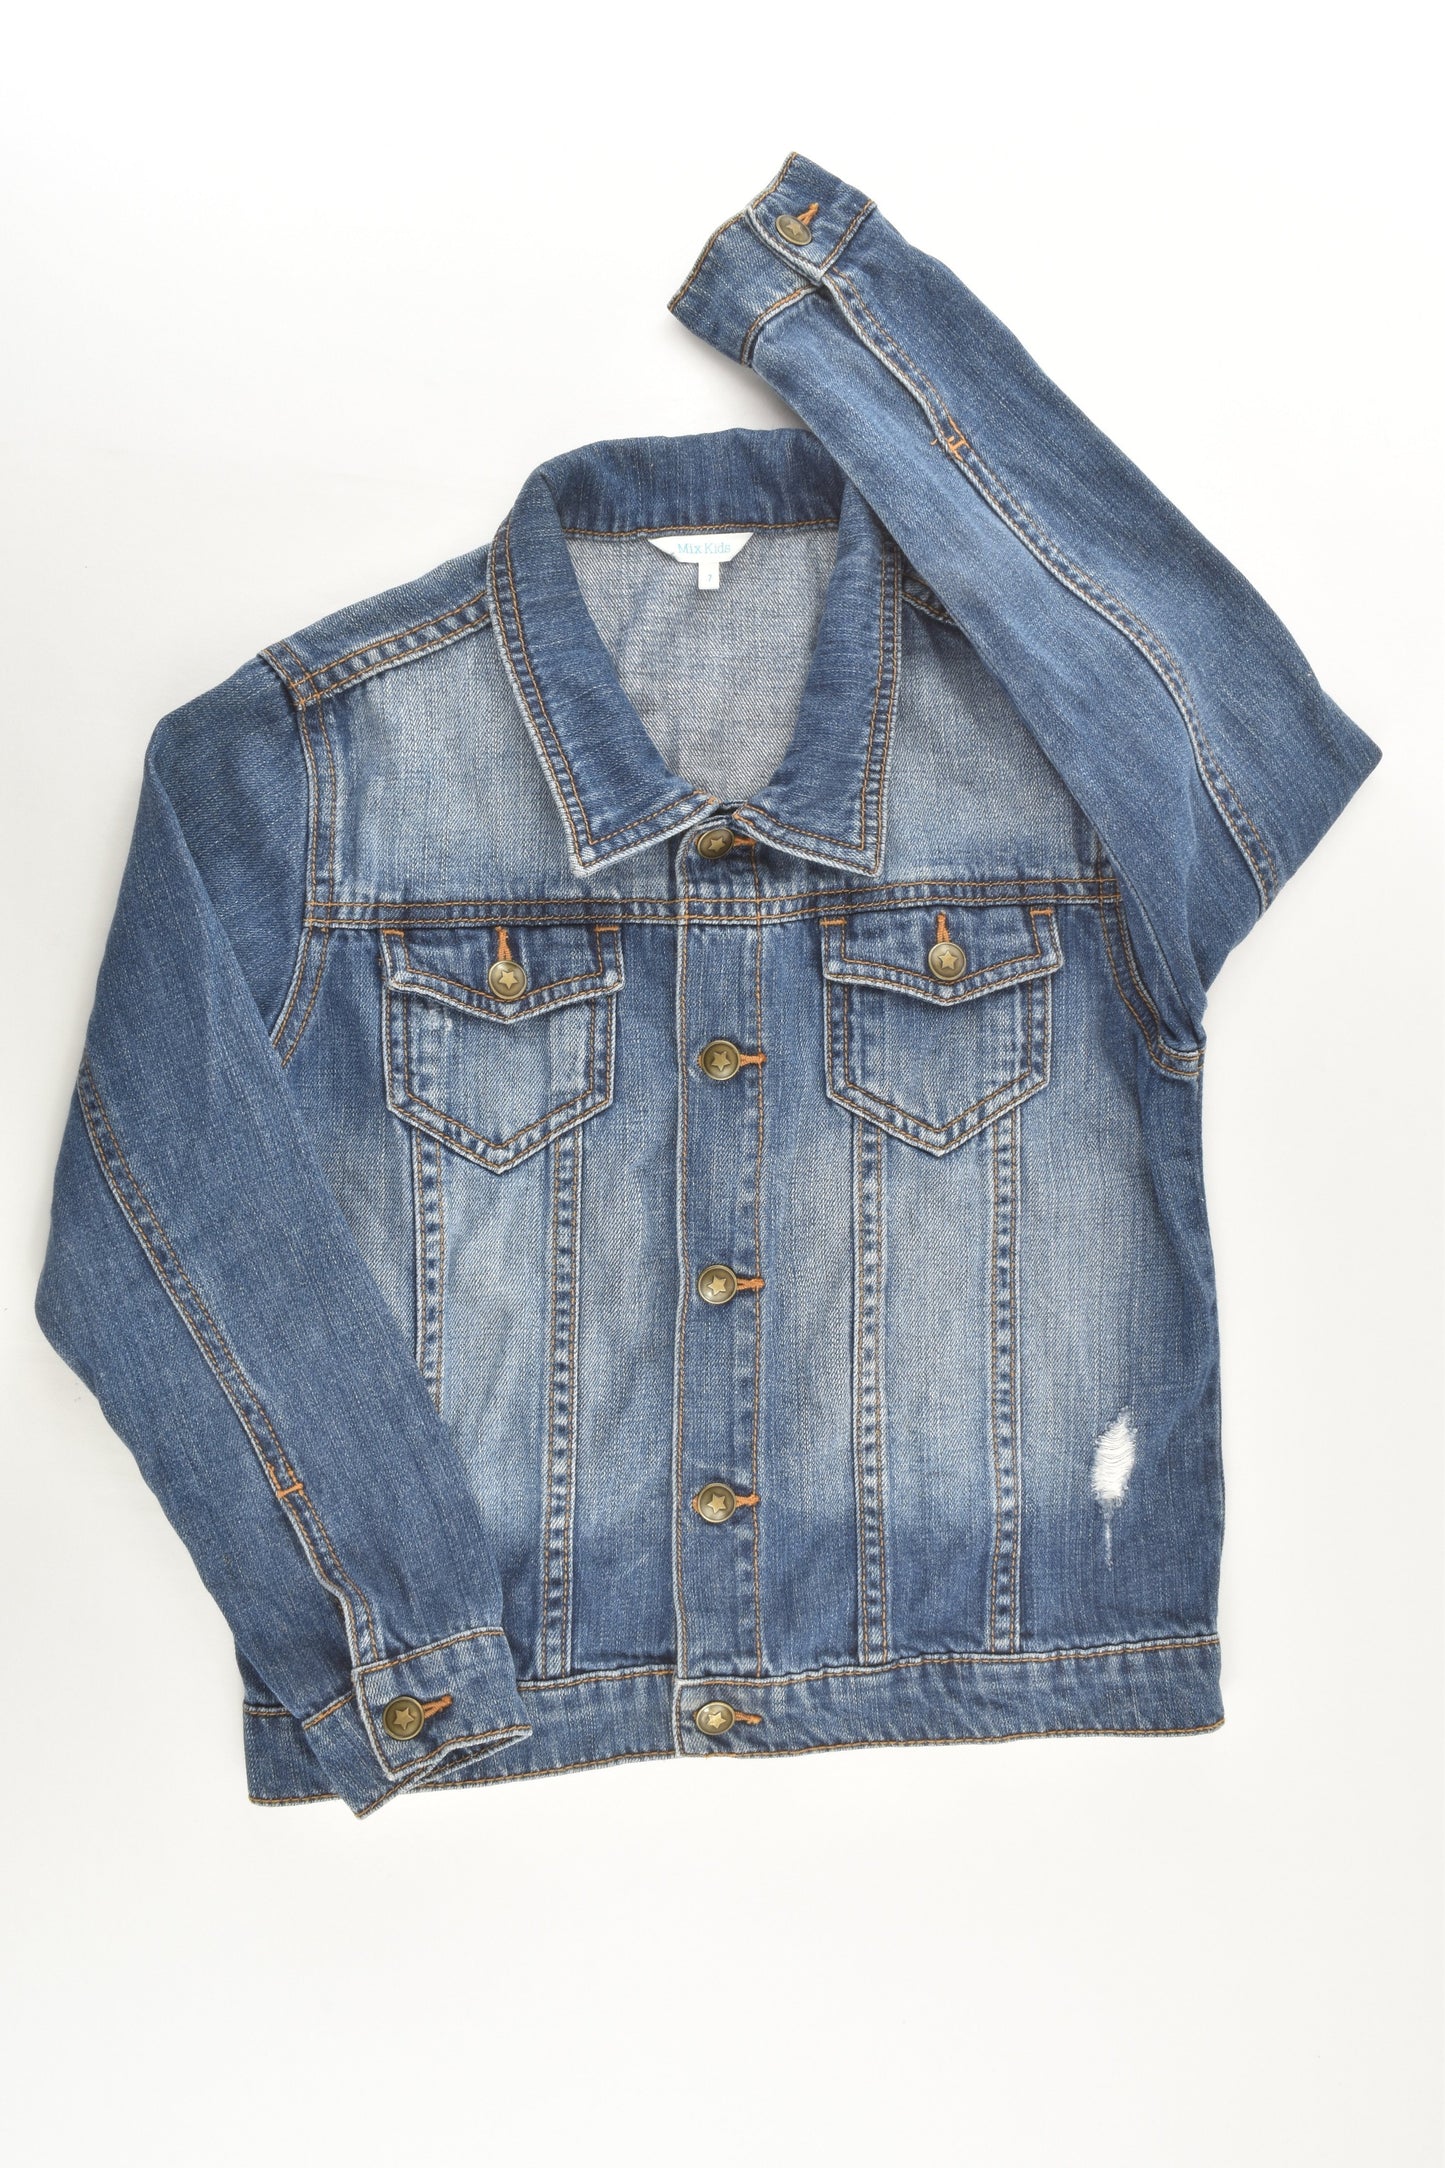 Mix Kids Size 7 Denim Jacket with Star Buttons